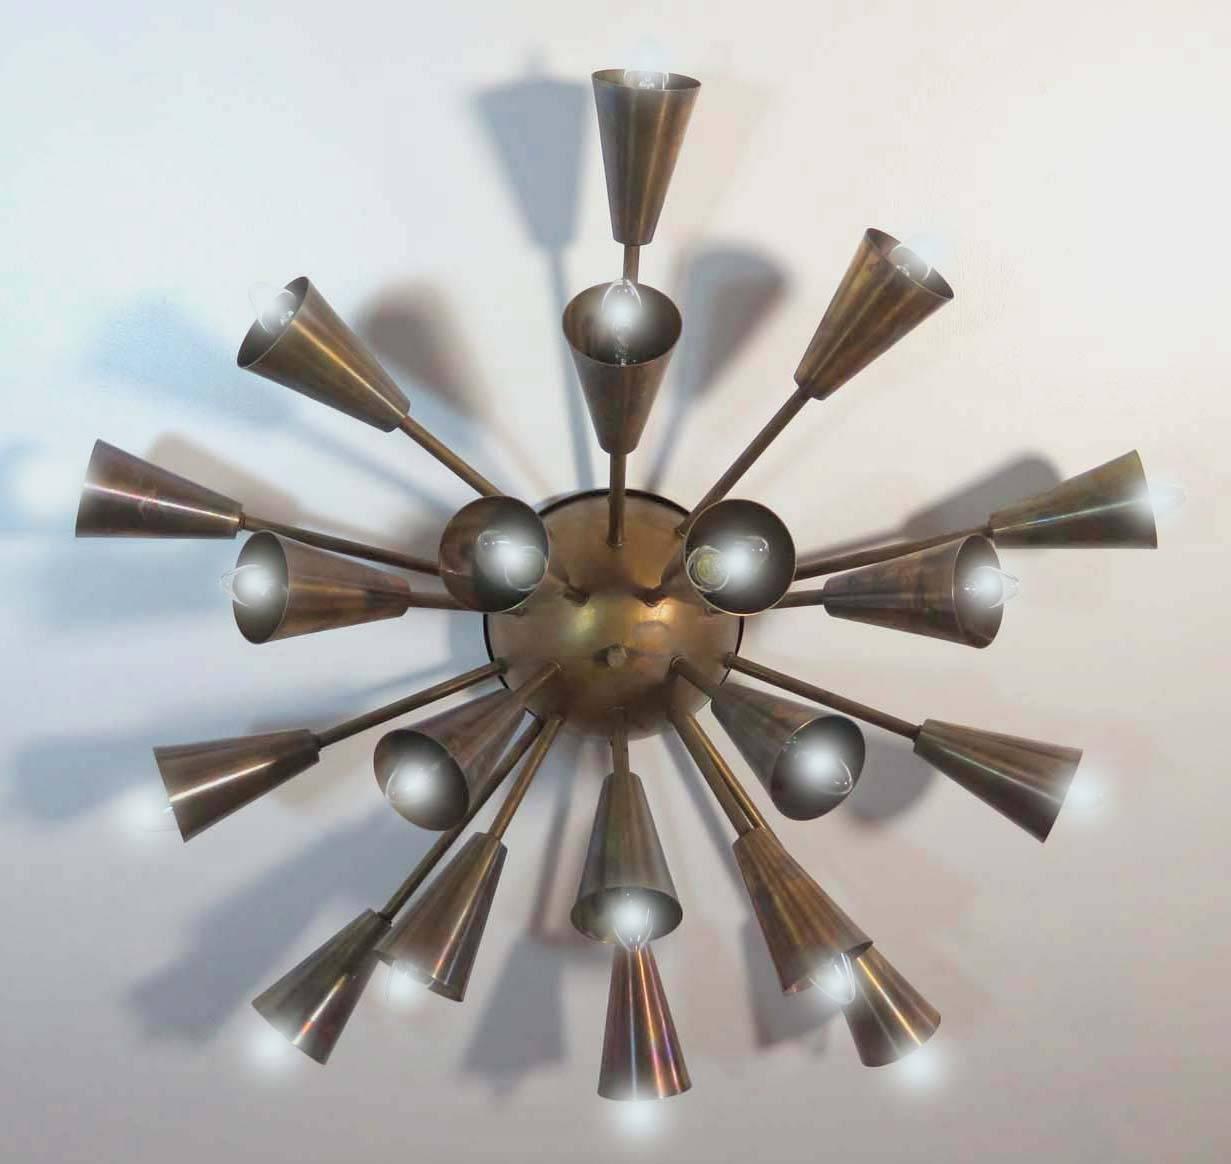 Each lamp is absolute fantastic and rare. The little bulbs are hidden in the brass part I know you will be blended by the light. Absolute important Italian lightning. 20 points of light E14
Period: 1950s
Dimensions: 10.25 inches (26 cm) depth;